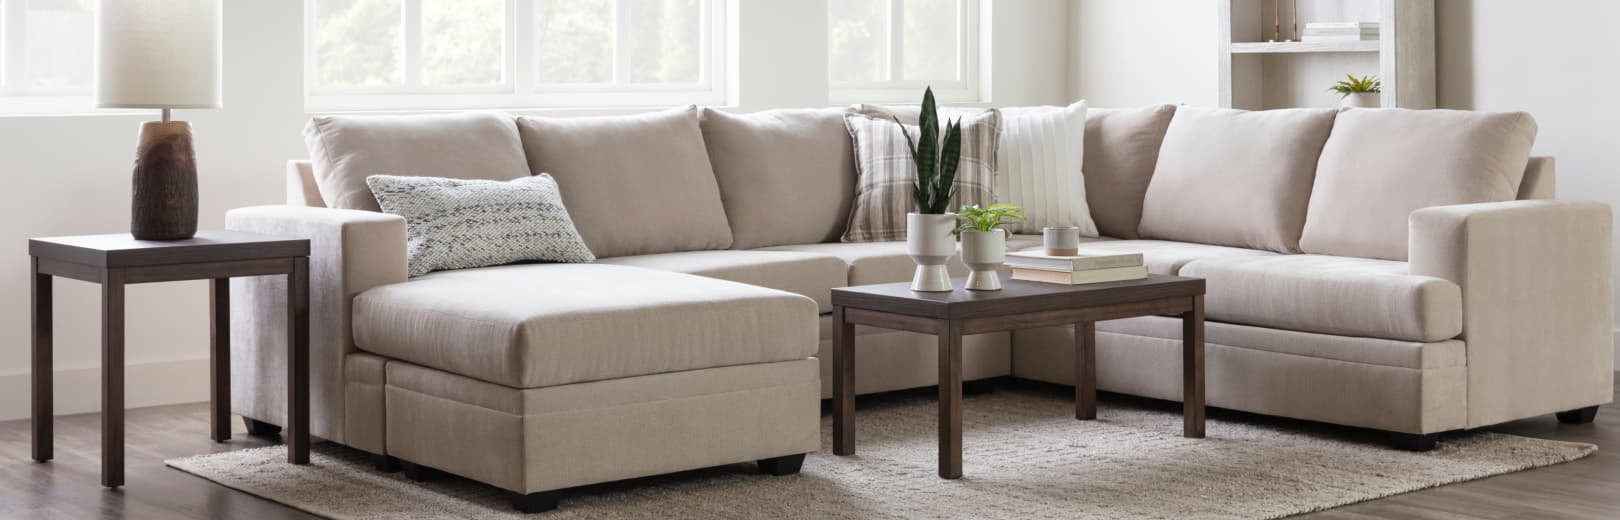 how to clean a fabric sofa with a steamer or couch cleaner